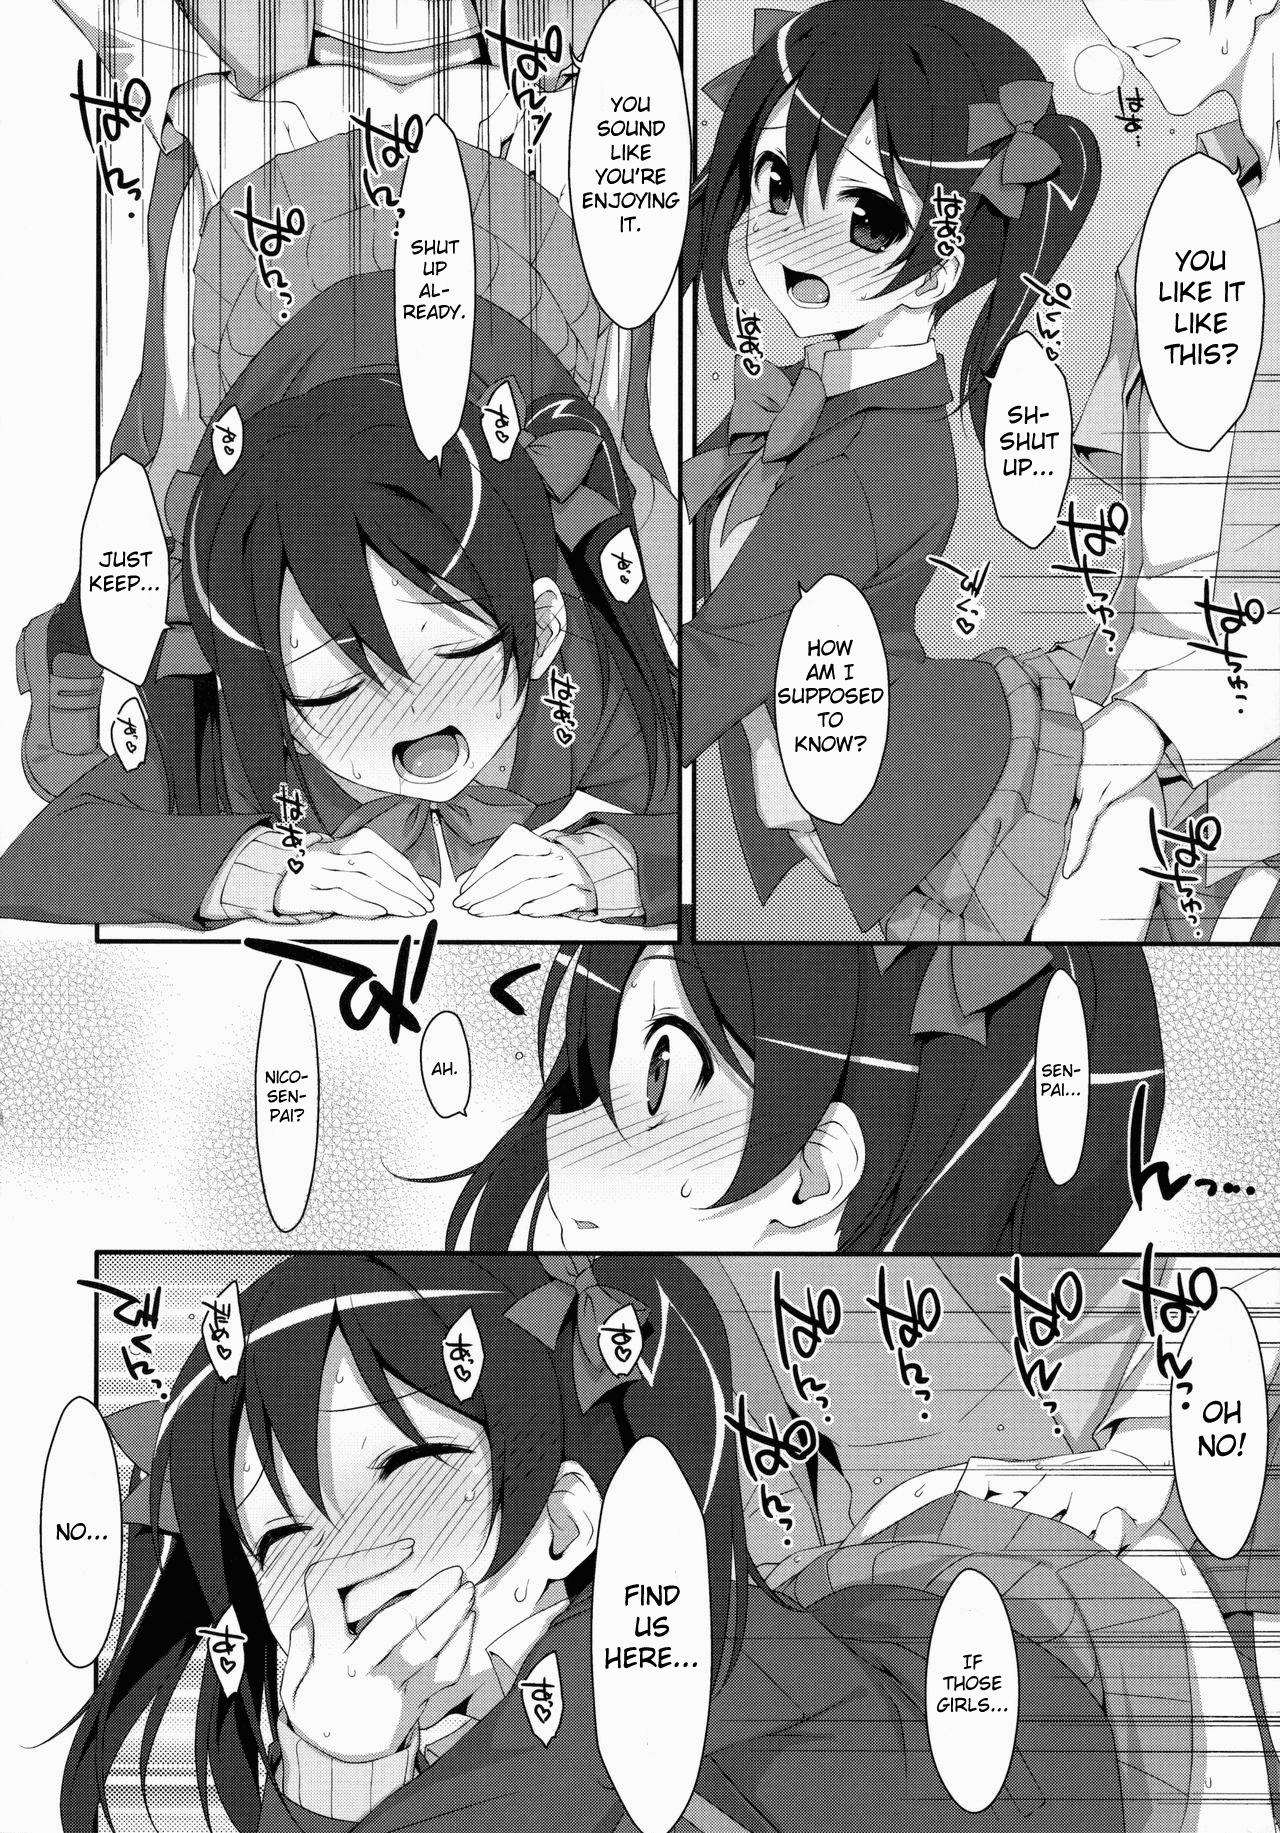 Funny LOVE NICO! one two - Love live Ex Girlfriend - Page 11